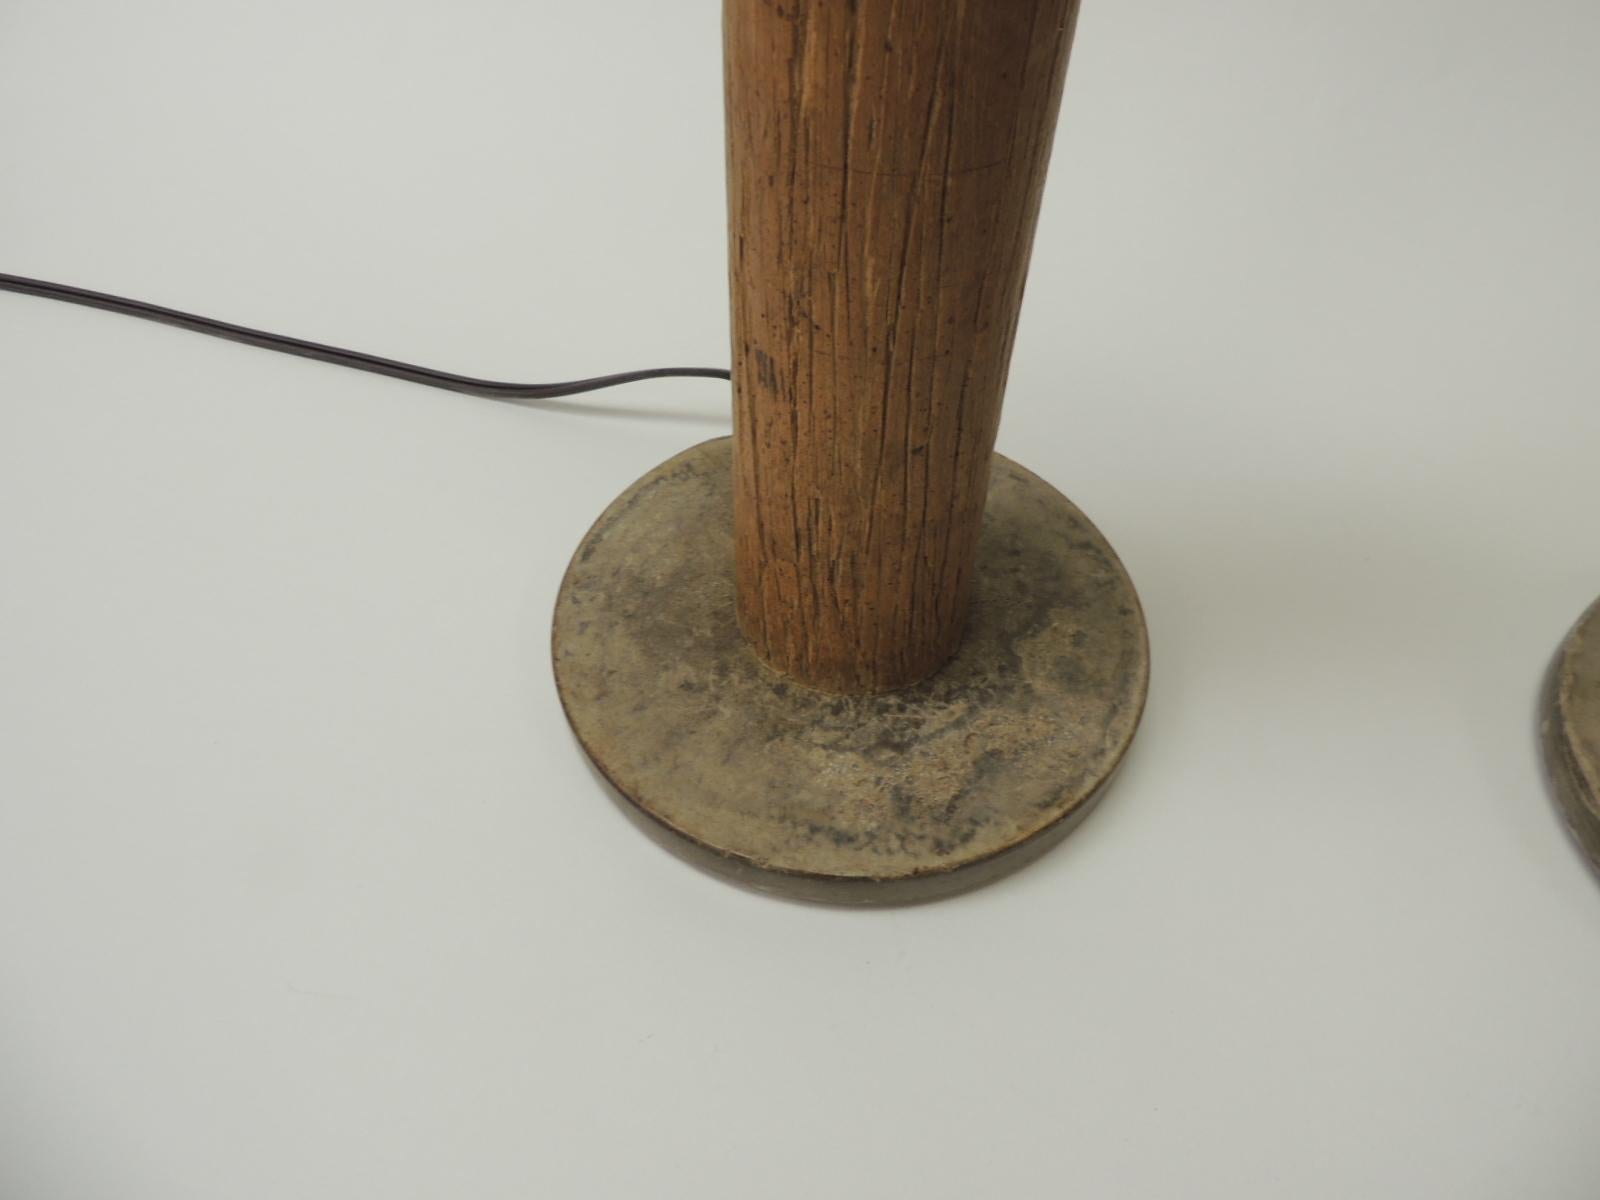 Pair of vintage wood found object table lamps.
Vintage wood found object table lamp. Boobing spool wood table lamp with silver color socket and cord. Up to 60 watts. Turn on/off switch on top. USA, 1980s.
Size” 6 x 6 x 17 H.